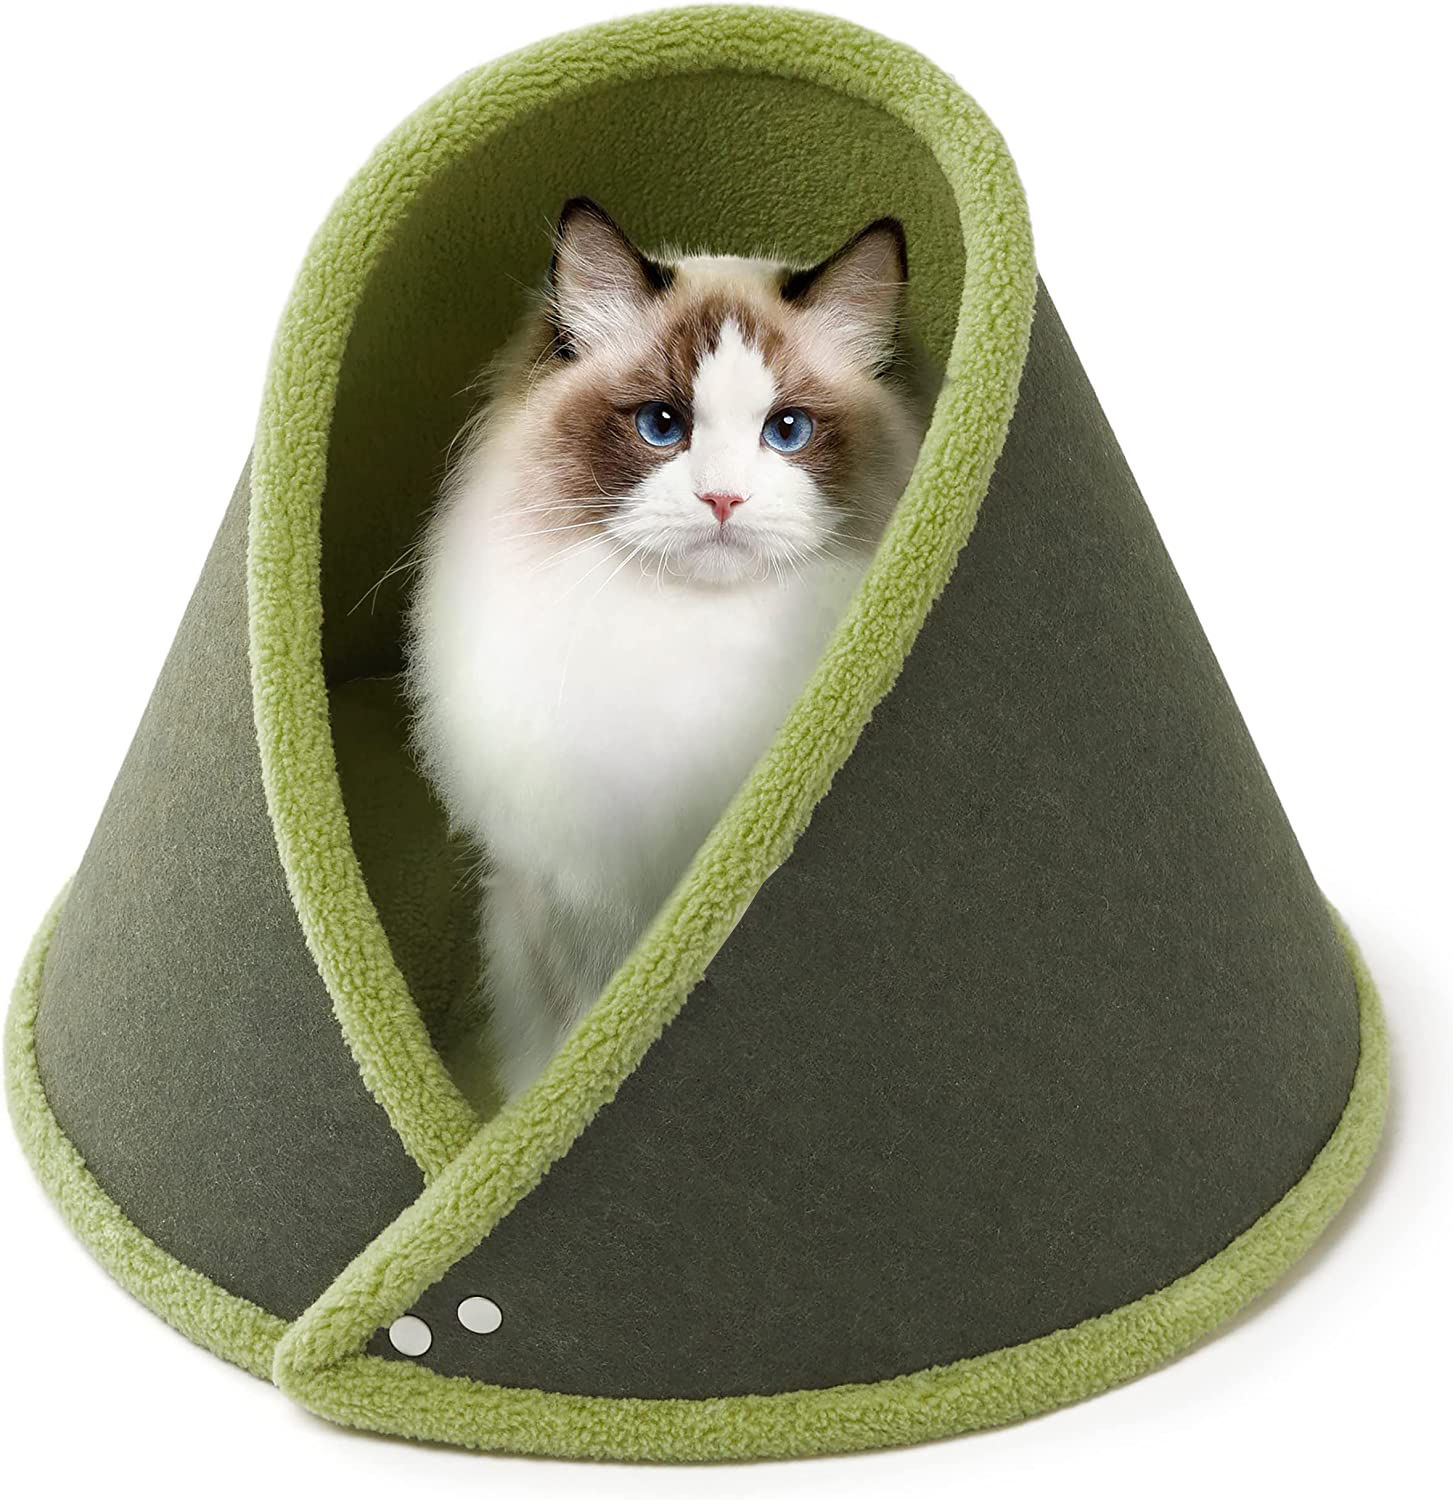 New Comfortable Fluffy And Felt Pet Bed For Cat Small Dogs